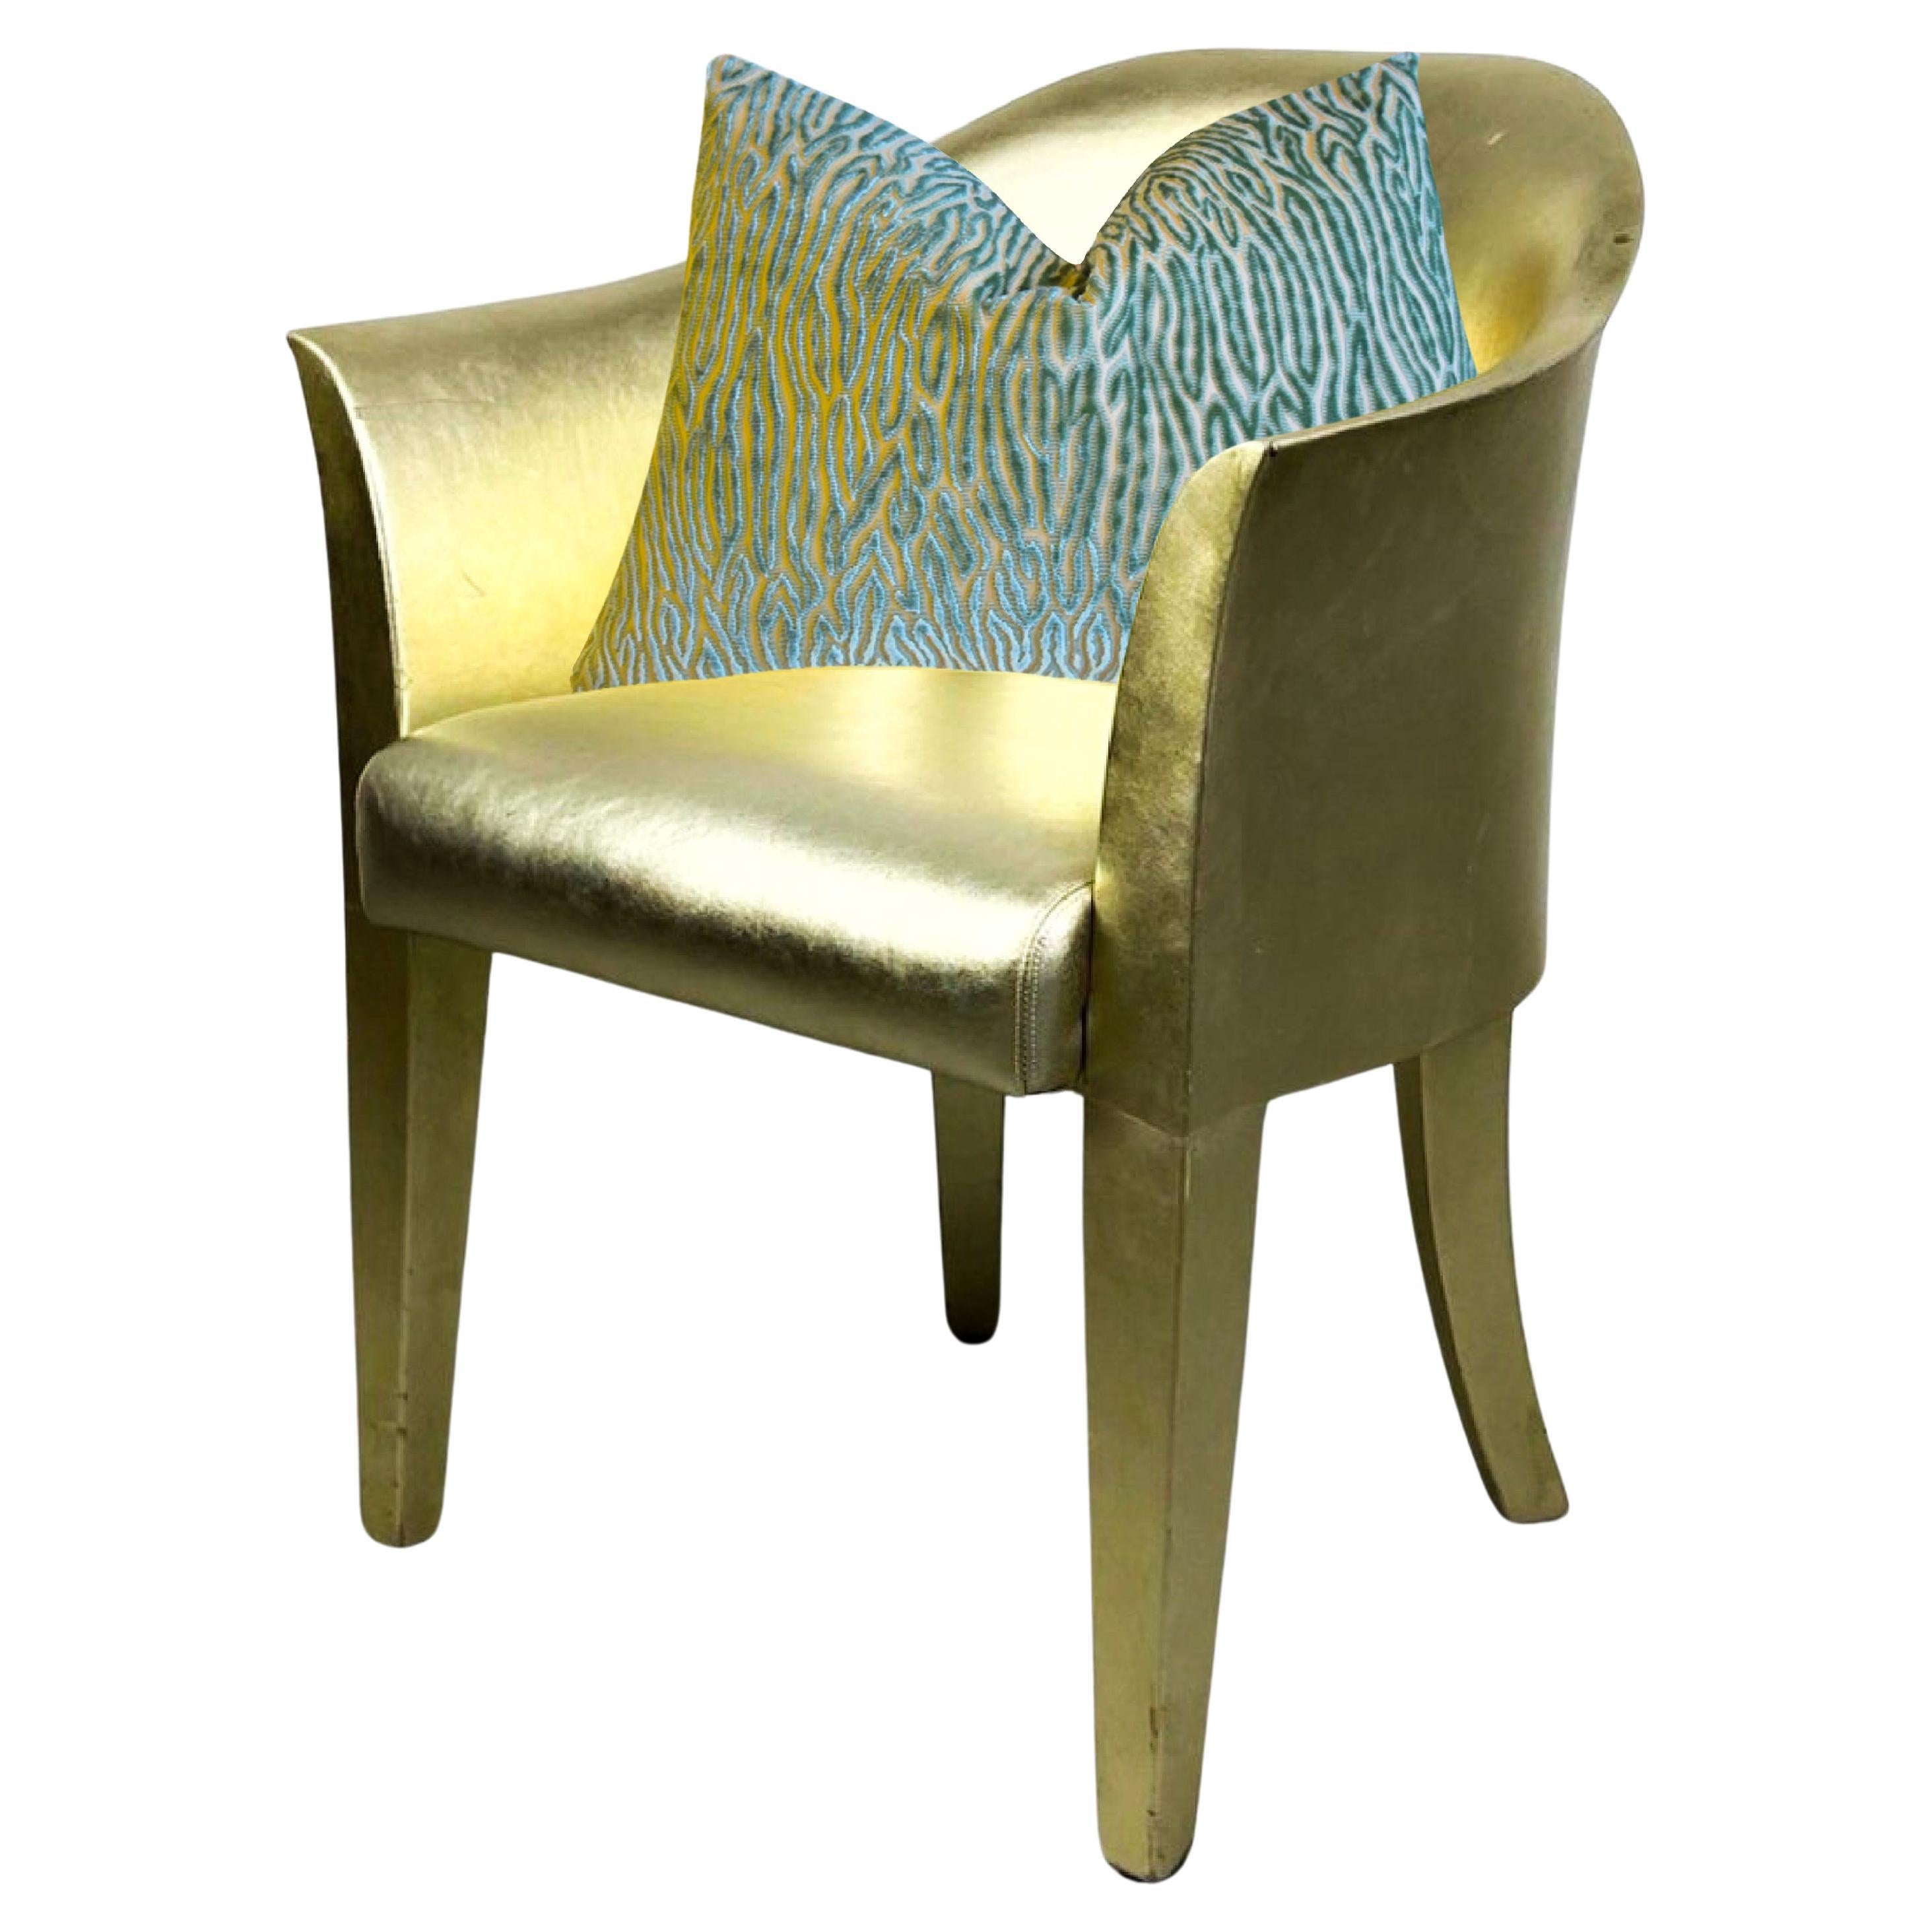 Karl Springer Gilt Leather Tulip Armchair Lounge Chair, Signed, 1991, Gold, USA. For Sale